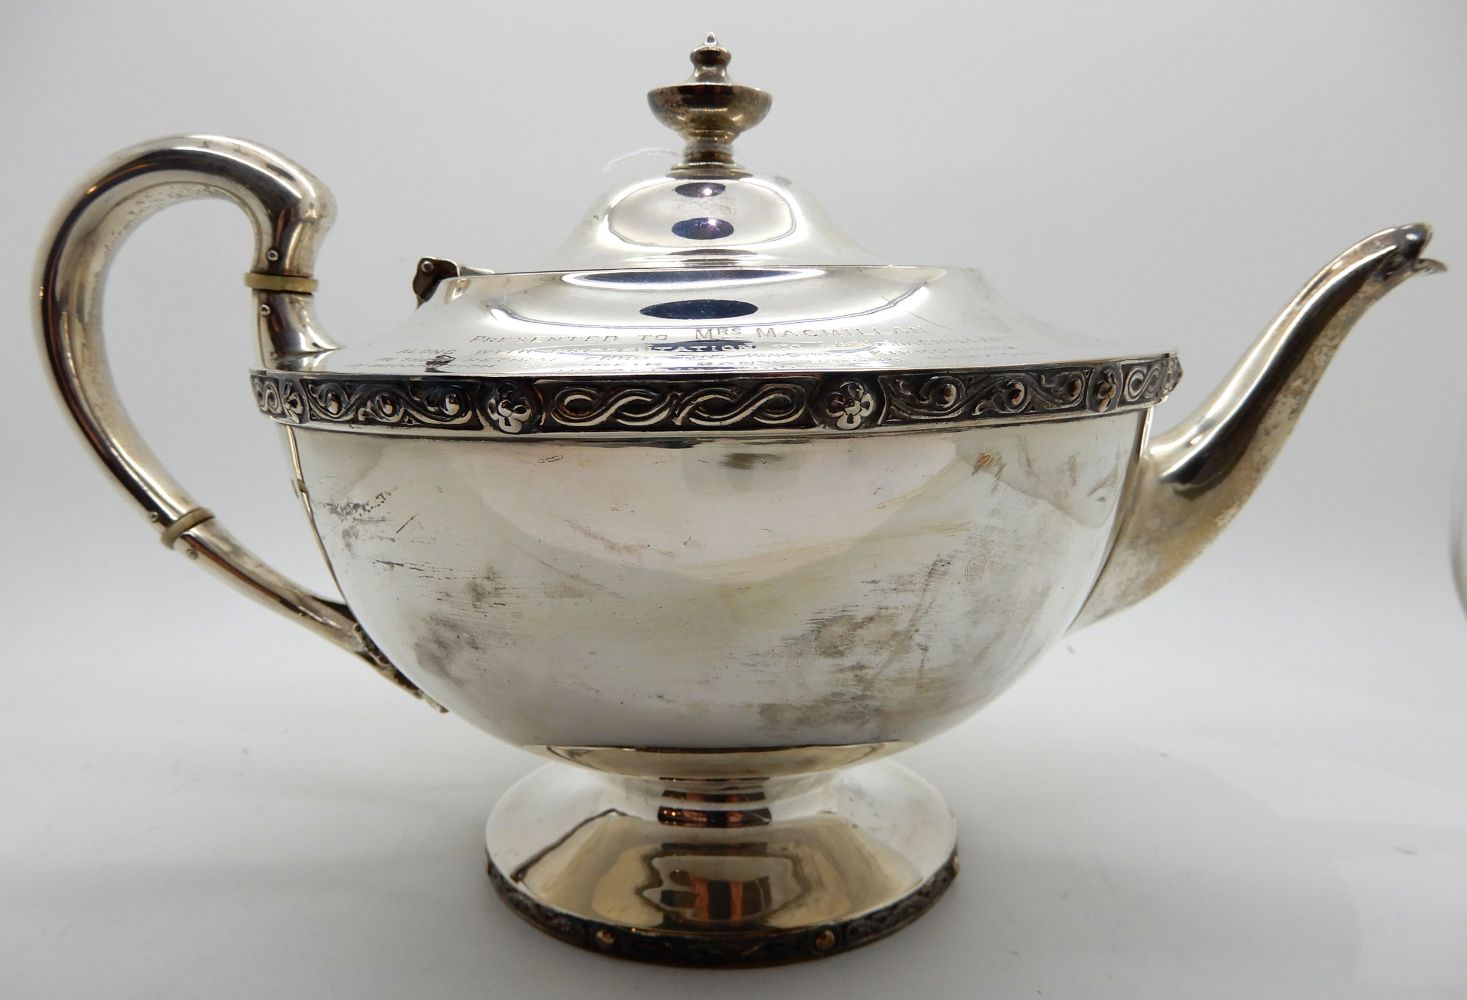 ANTIQUES & COLLECTABLES TWO DAY AUCTION - THURSDAY 12TH & FRIDAY 13TH NOVEMBER